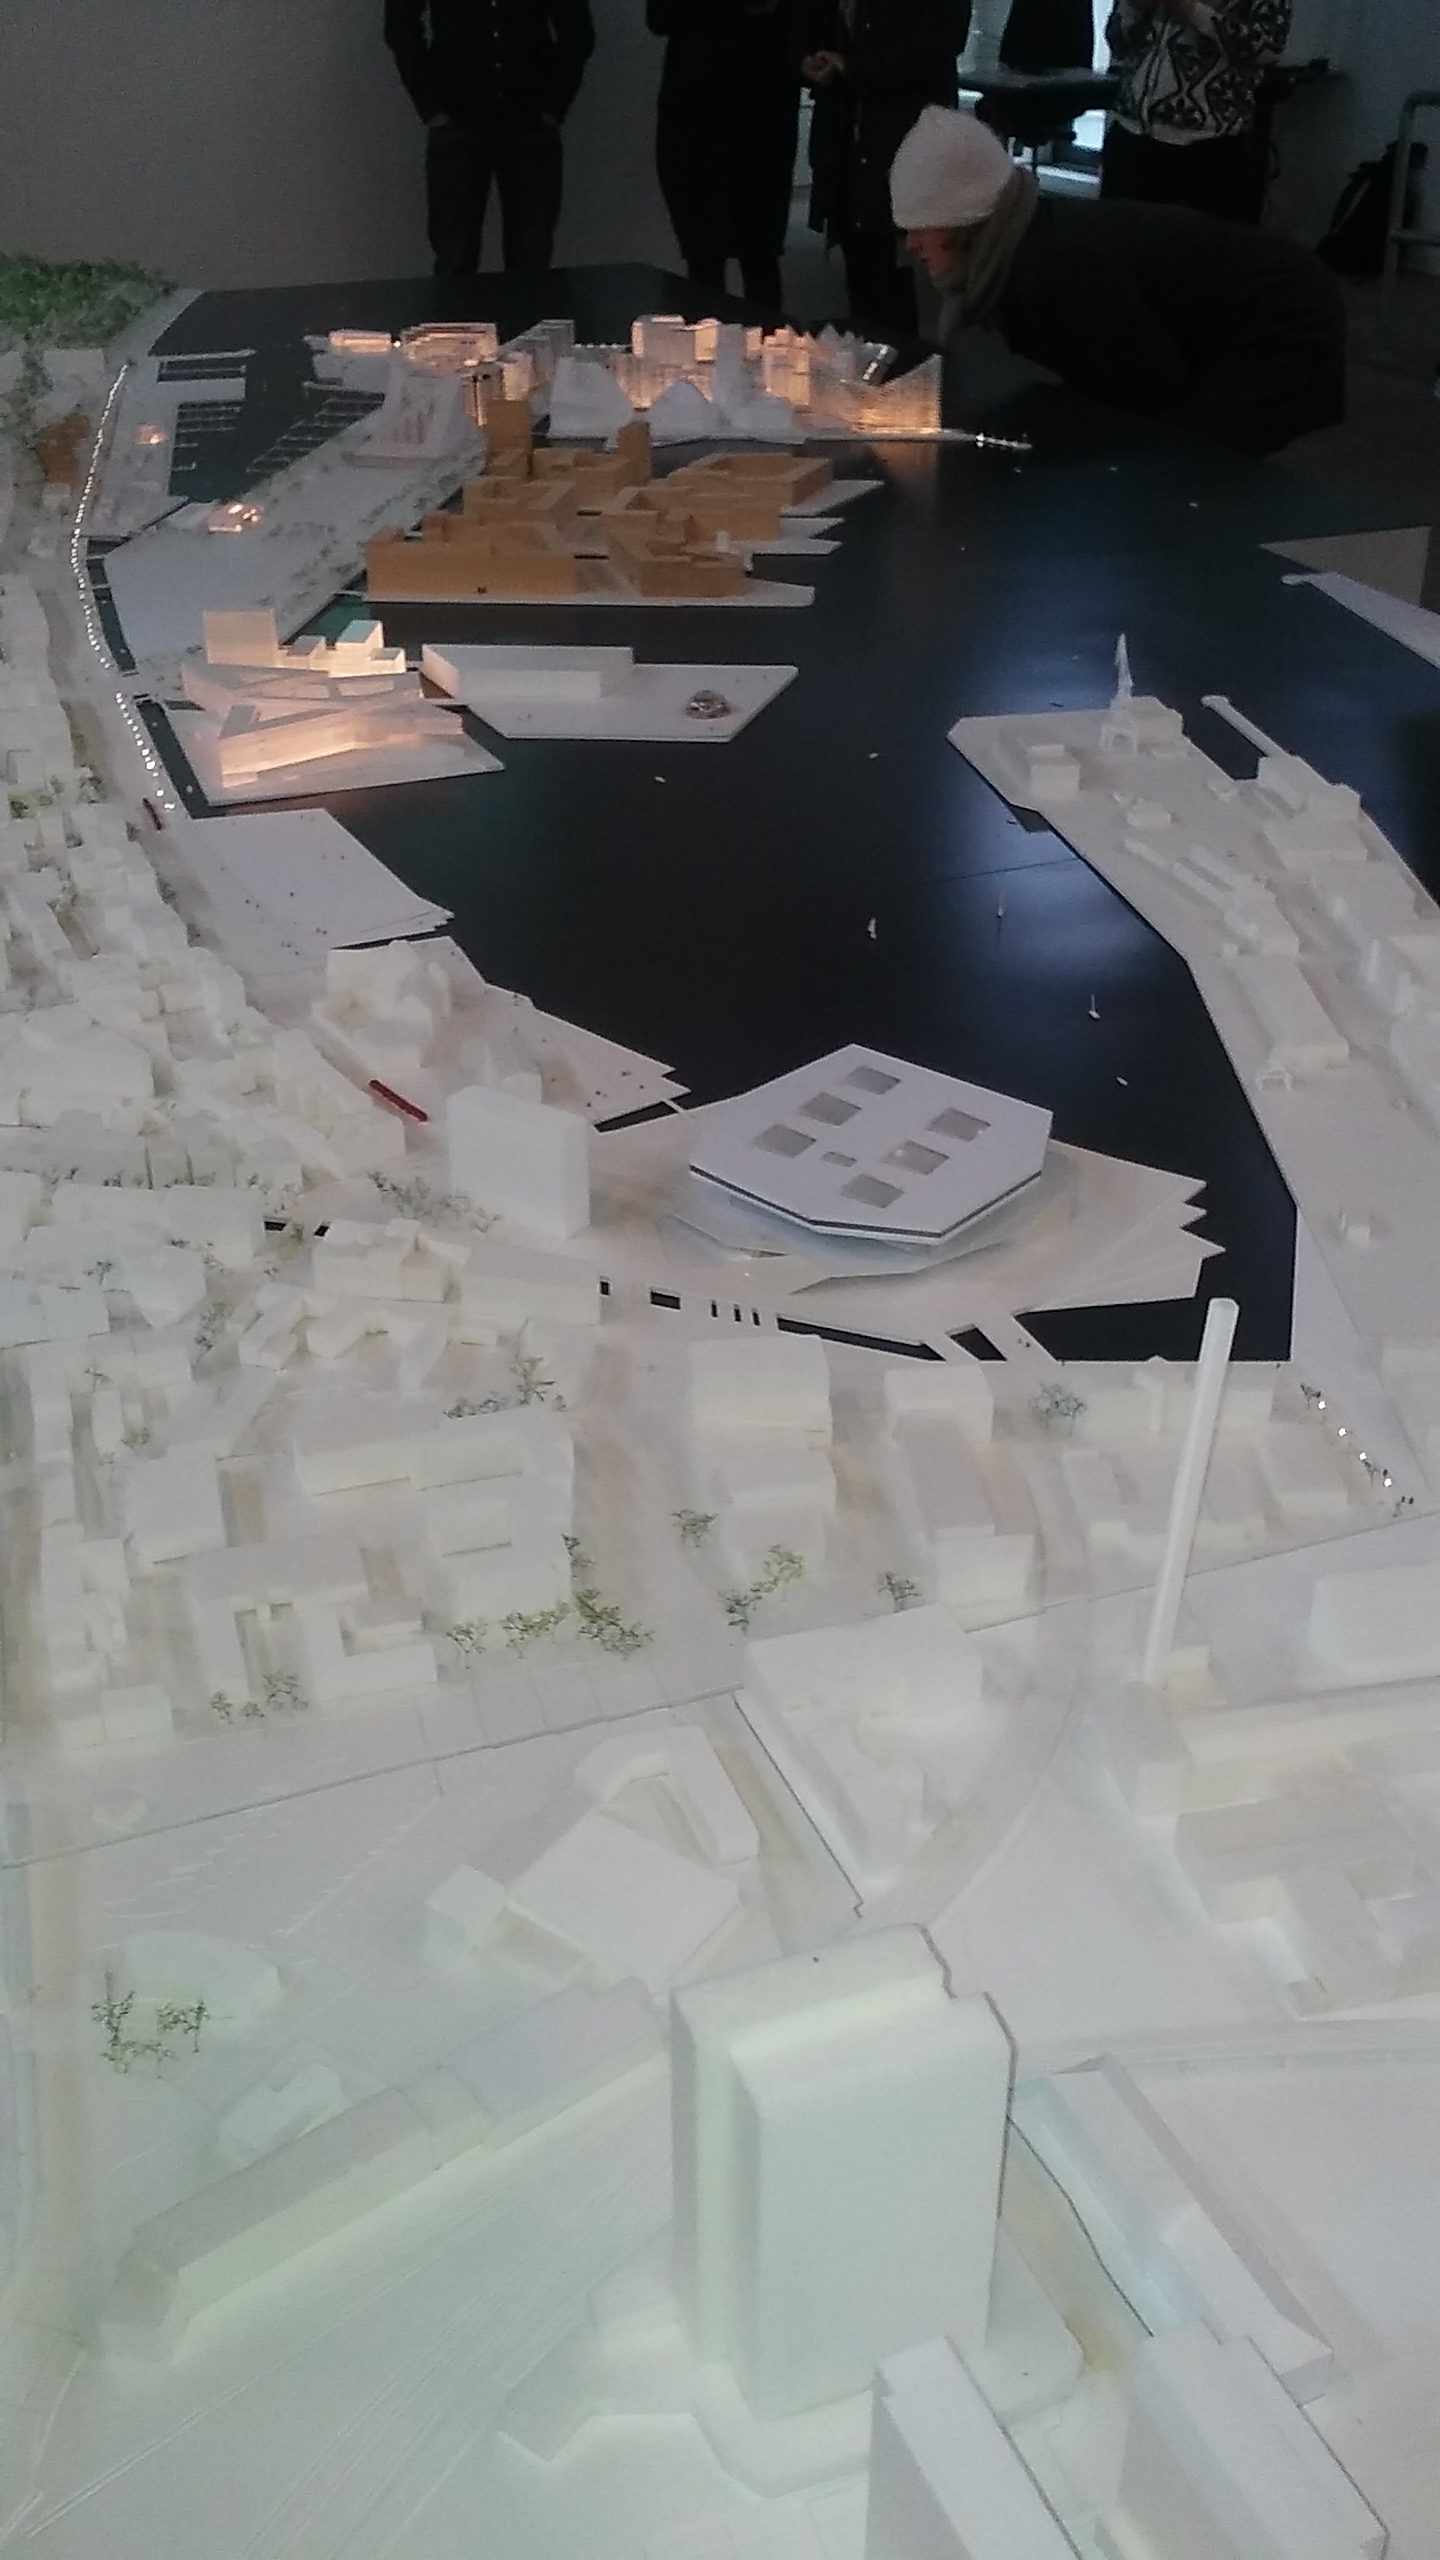 Aarhus harbour model. Mid-map, Dokk1, the new main library. Behind, Aarhus Ø: Navitas, engineering school, then the wooden model of the next development phase and finaly the building that are already done.